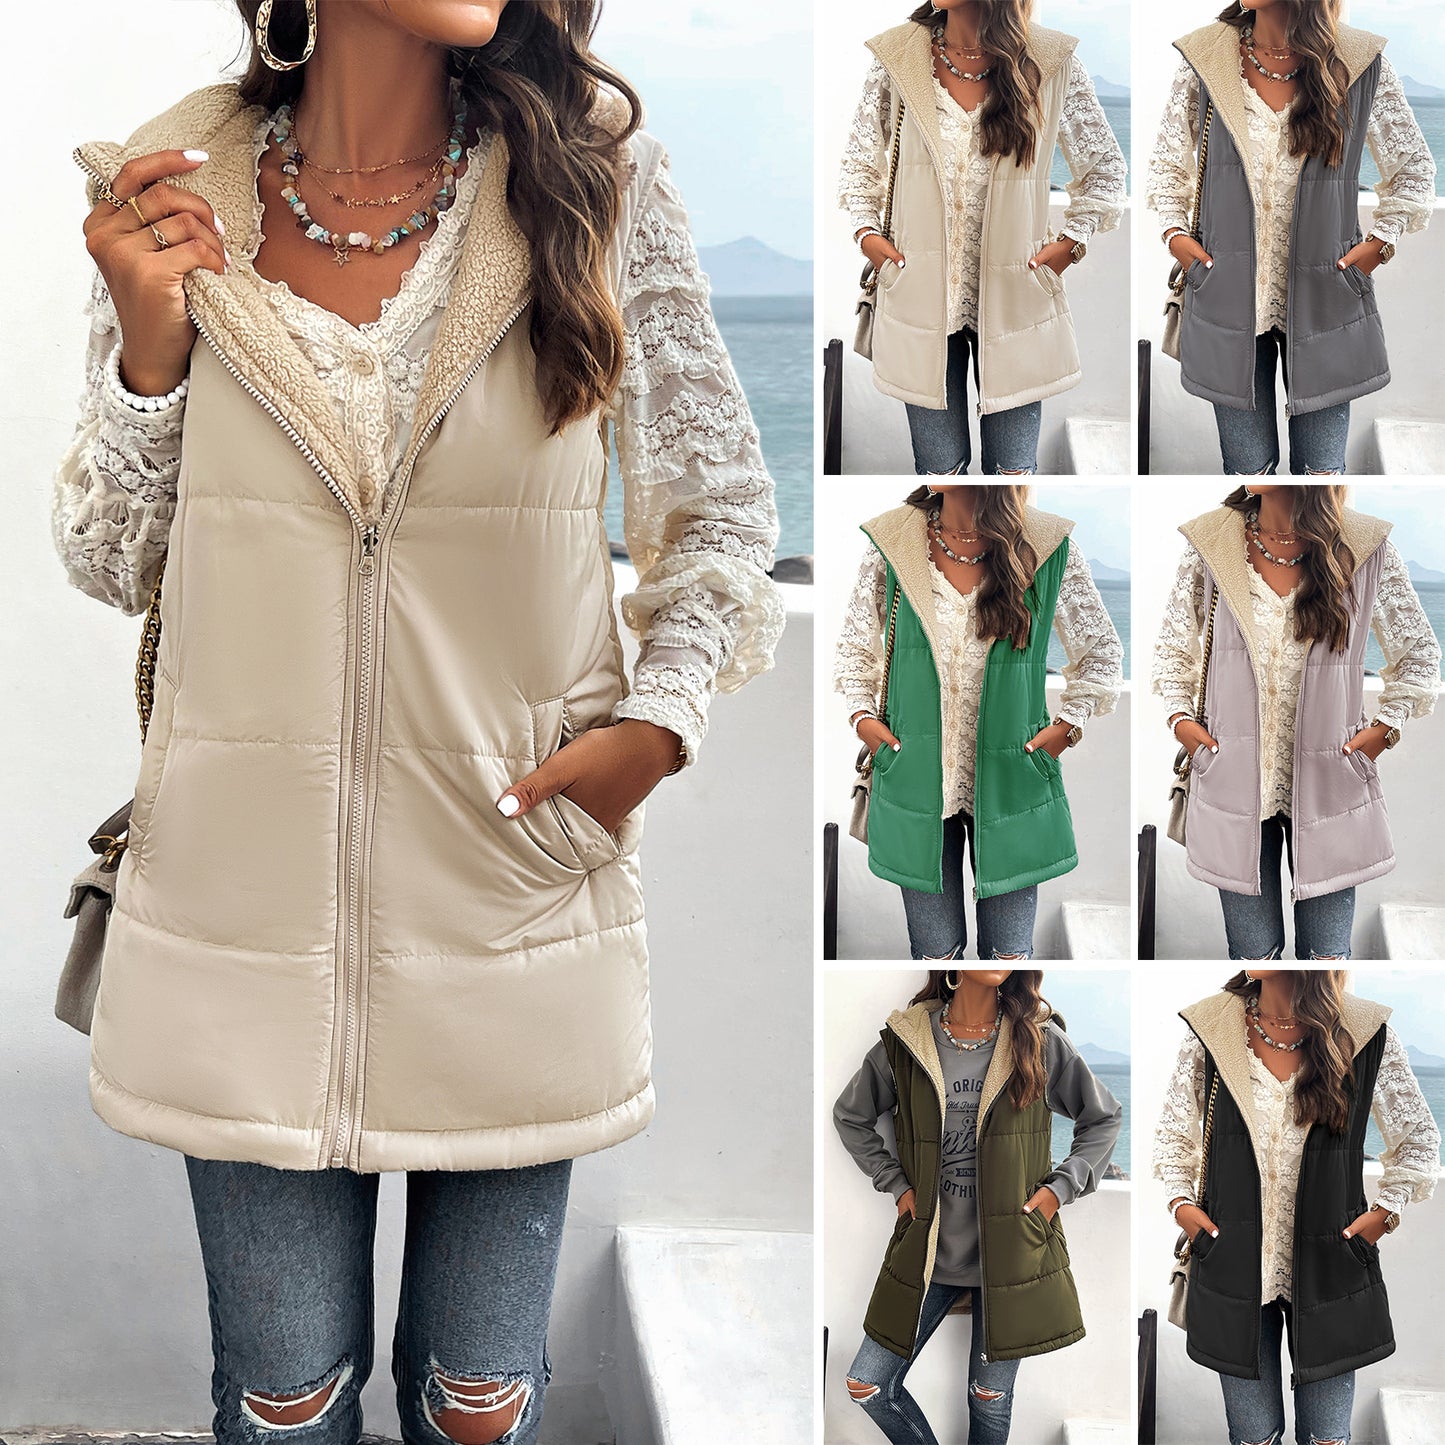 Winter Vest Women Loose Commuting Mid-length Hooded Cotton Jacket With Pockets Fashion Warm Zipper Fluffy Coat Outdoor Clothing